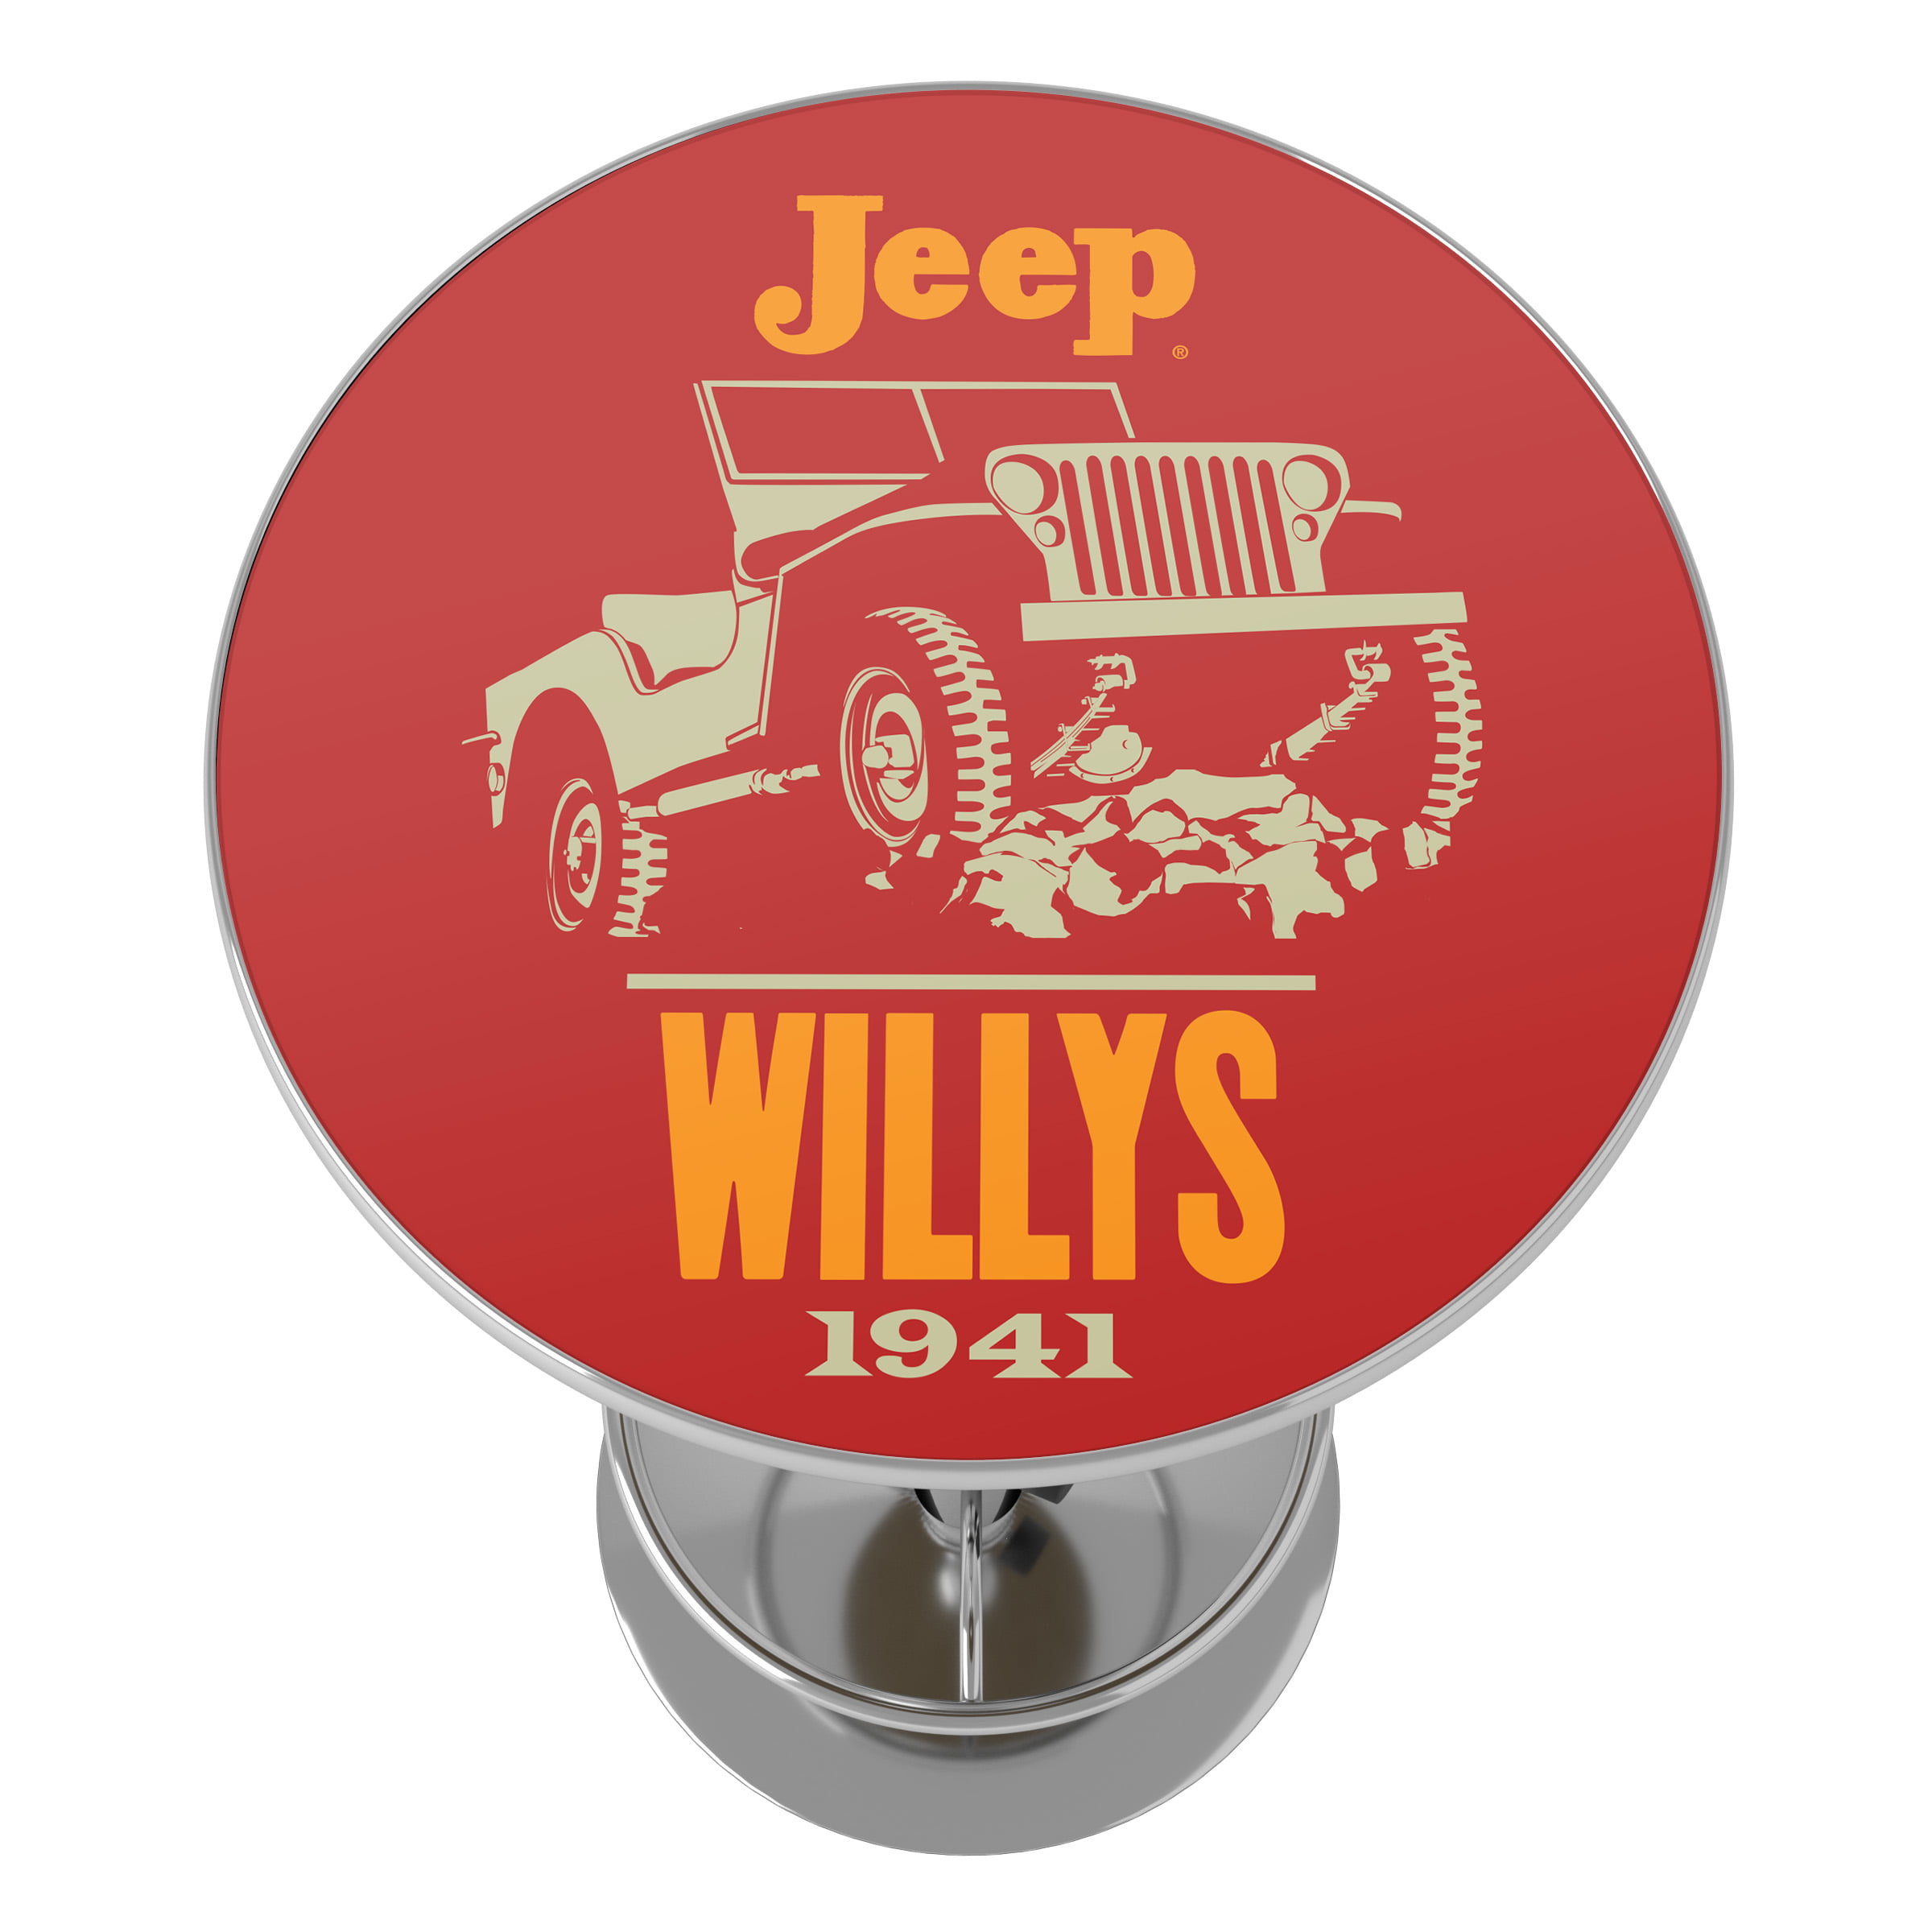 Automotive art for your desk Willy's Jeep Business Card Holder Custom personalized Jeep business card holder office or man cave